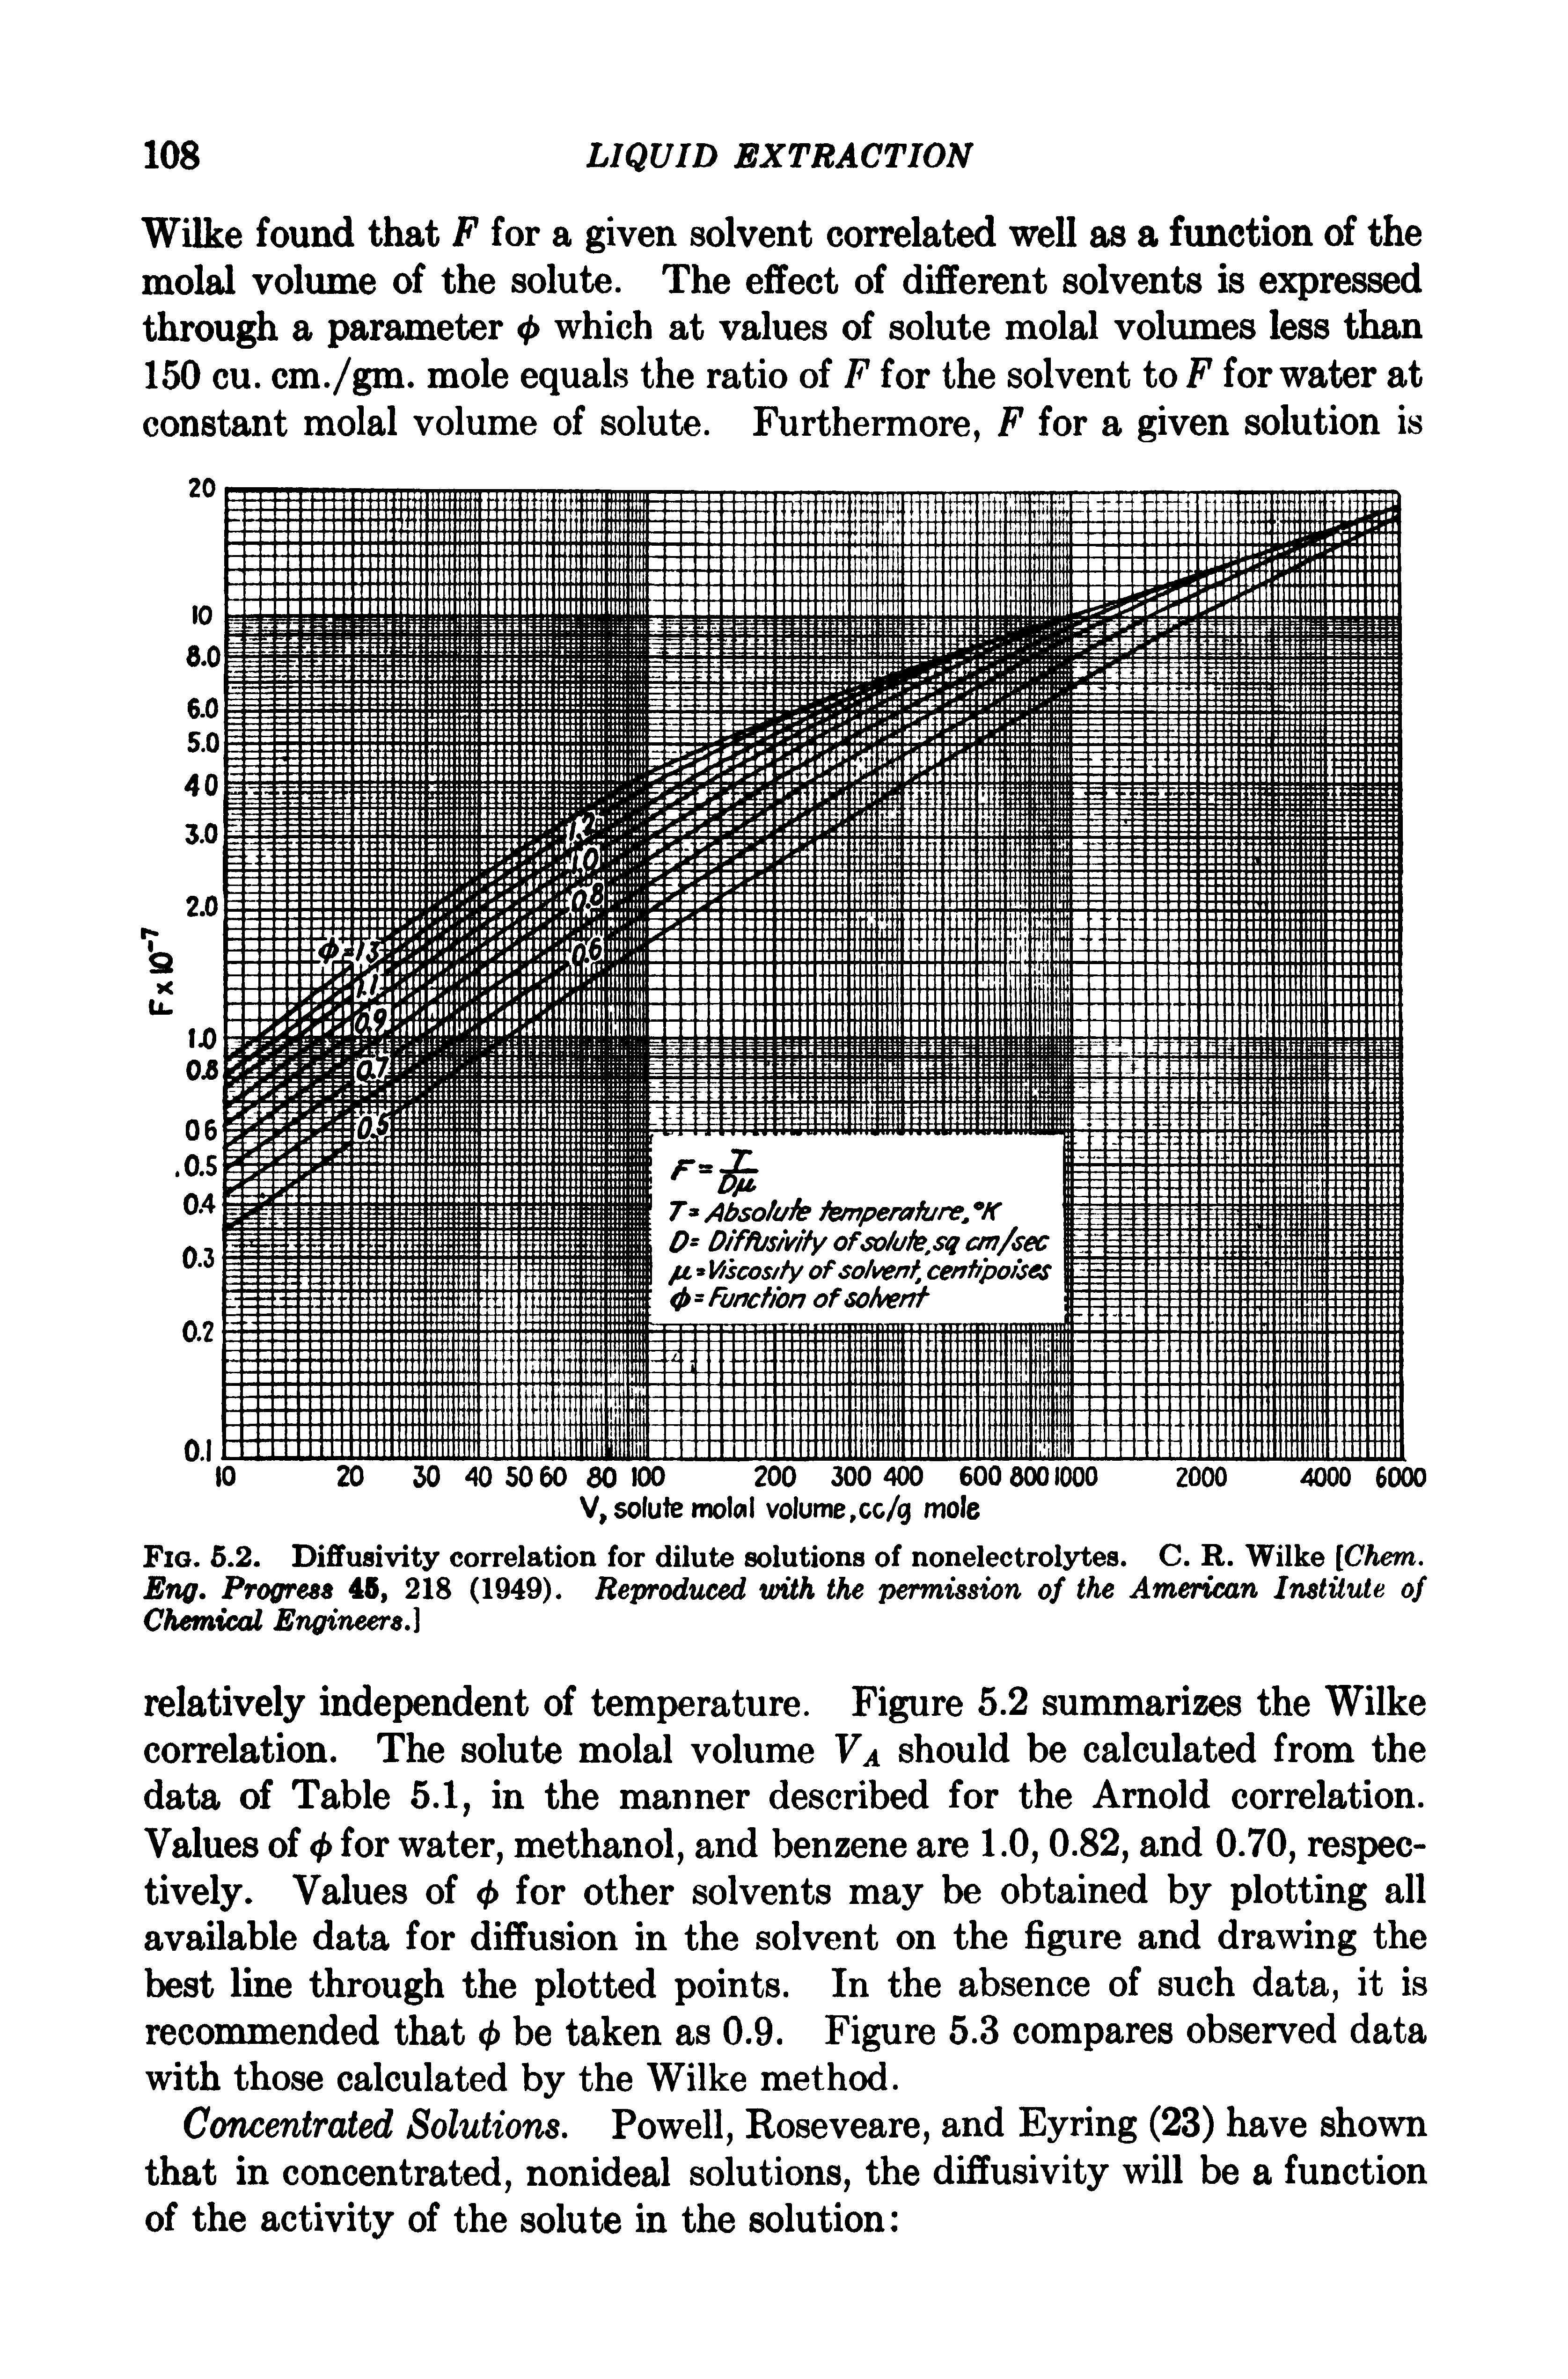 Fig. 5.2. Diffusivity correlation for dilute solutions of nonelectrolytes. C. R. Wilke [Chem. Eng. Progress 46, 218 (1949). Reproduced with the permission of the American Institute of Chemical Engineers.]...